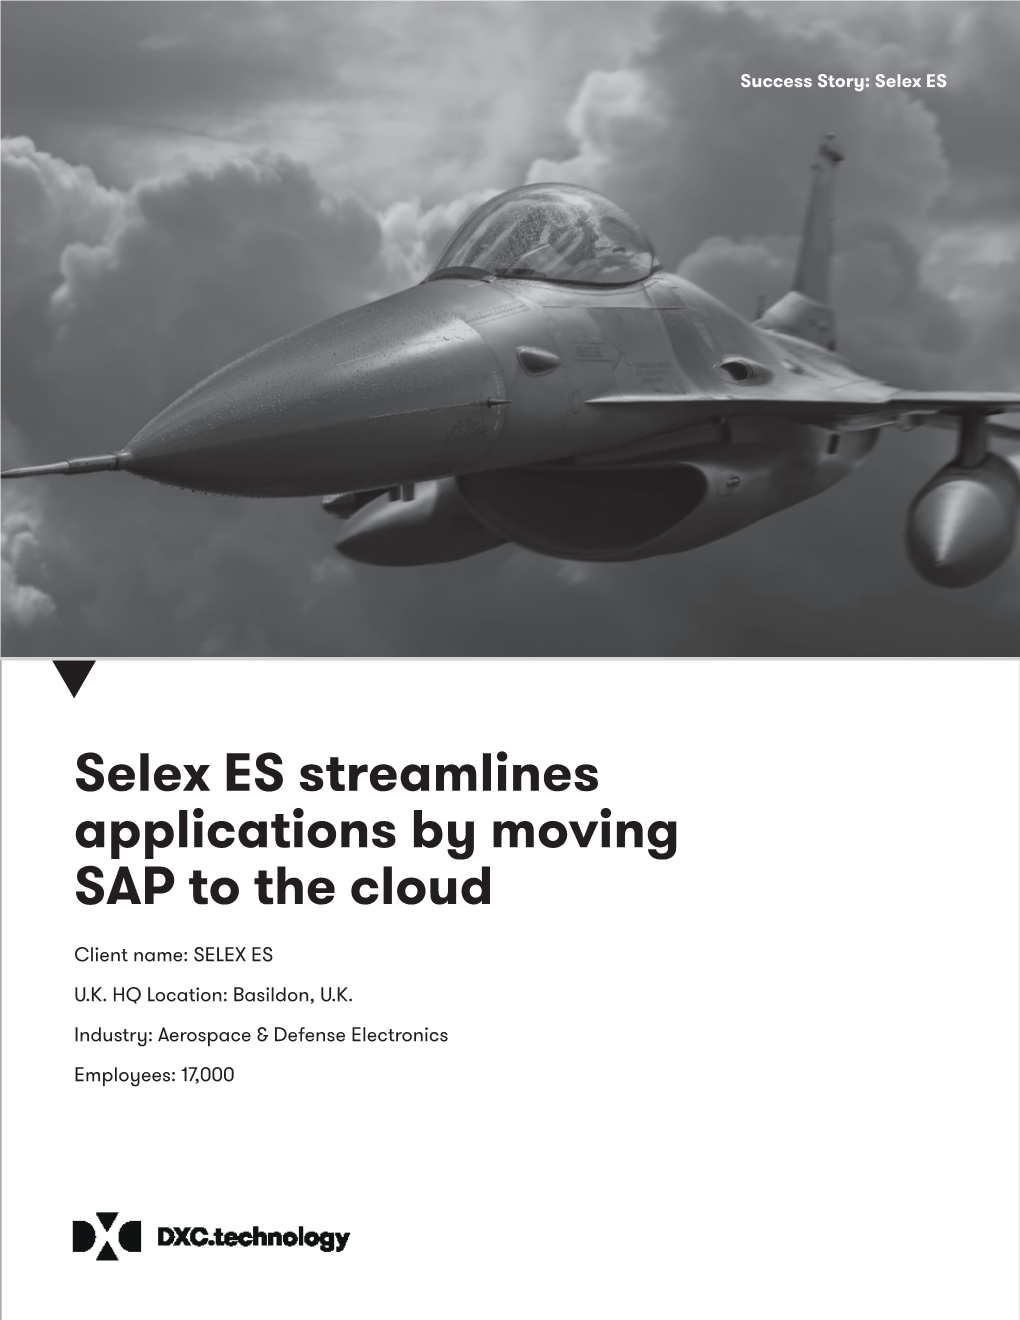 Selex ES Streamlines Applications by Moving SAP to the Cloud